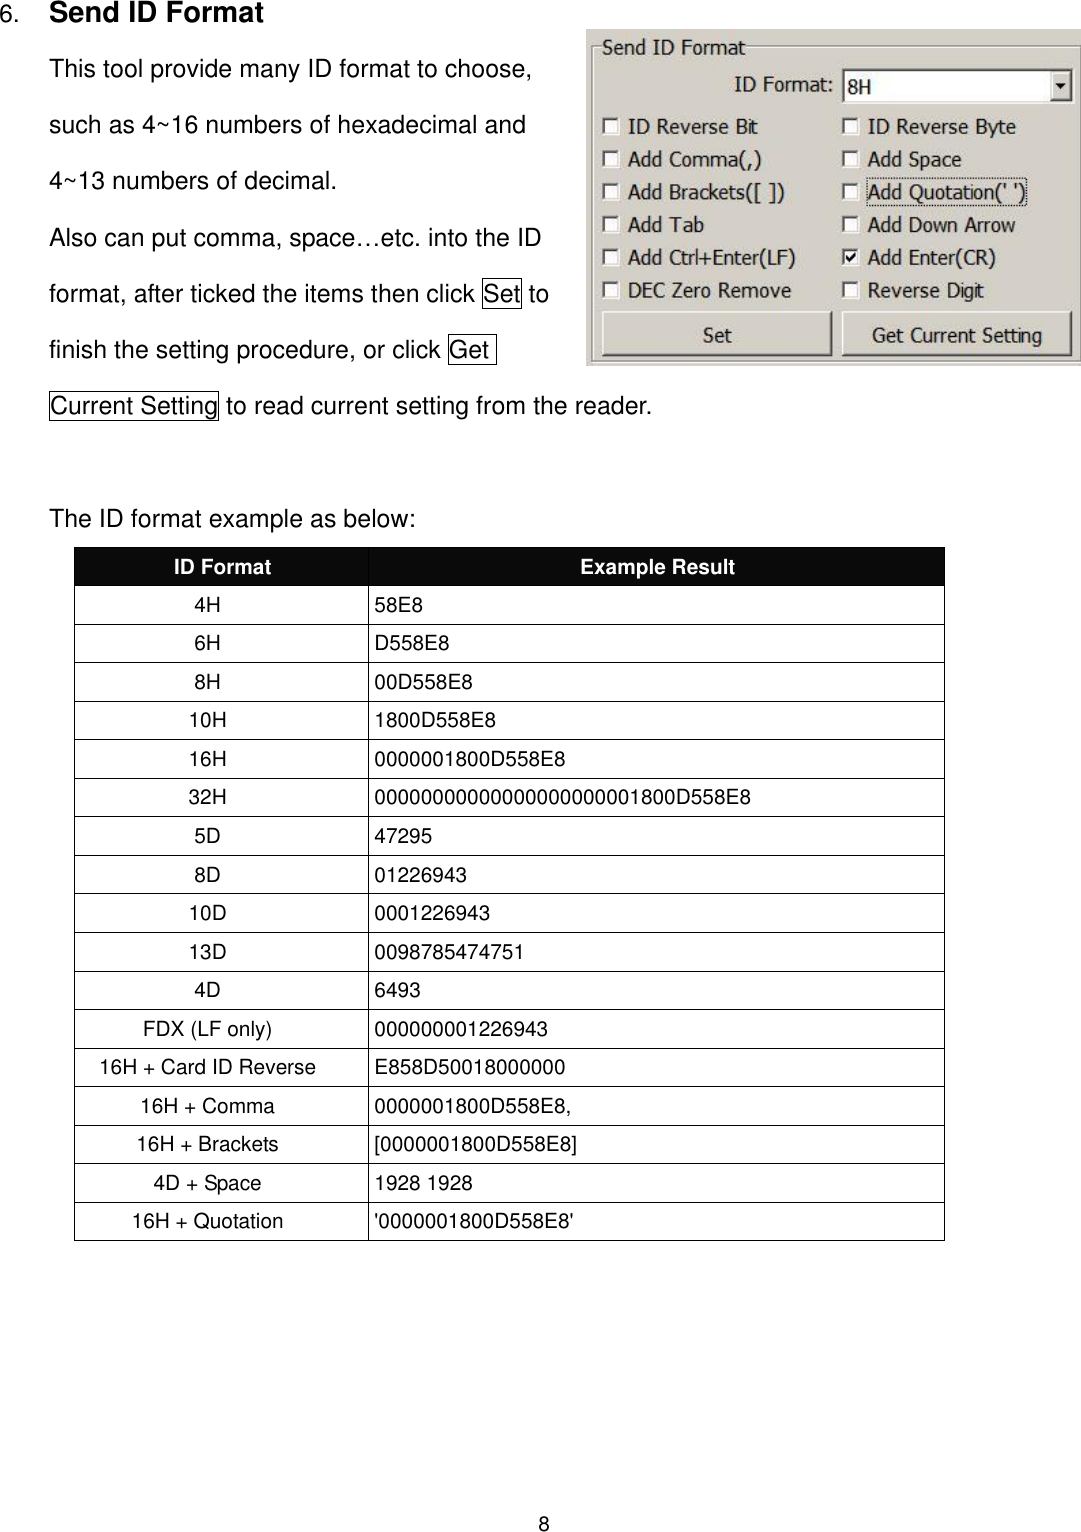 8  6. Send ID Format This tool provide many ID format to choose, such as 4~16 numbers of hexadecimal and 4~13 numbers of decimal.   Also can put comma, space…etc. into the ID format, after ticked the items then click Set to finish the setting procedure, or click Get Current Setting to read current setting from the reader.    The ID format example as below: ID Format Example Result 4H 58E8 6H D558E8 8H 00D558E8 10H 1800D558E8   16H 0000001800D558E8 32H 00000000000000000000001800D558E8 5D 47295 8D 01226943 10D 0001226943 13D 0098785474751 4D 6493 FDX (LF only) 000000001226943 16H + Card ID Reverse E858D50018000000 16H + Comma 0000001800D558E8, 16H + Brackets [0000001800D558E8] 4D + Space 1928 1928 16H + Quotation &apos;0000001800D558E8&apos;  